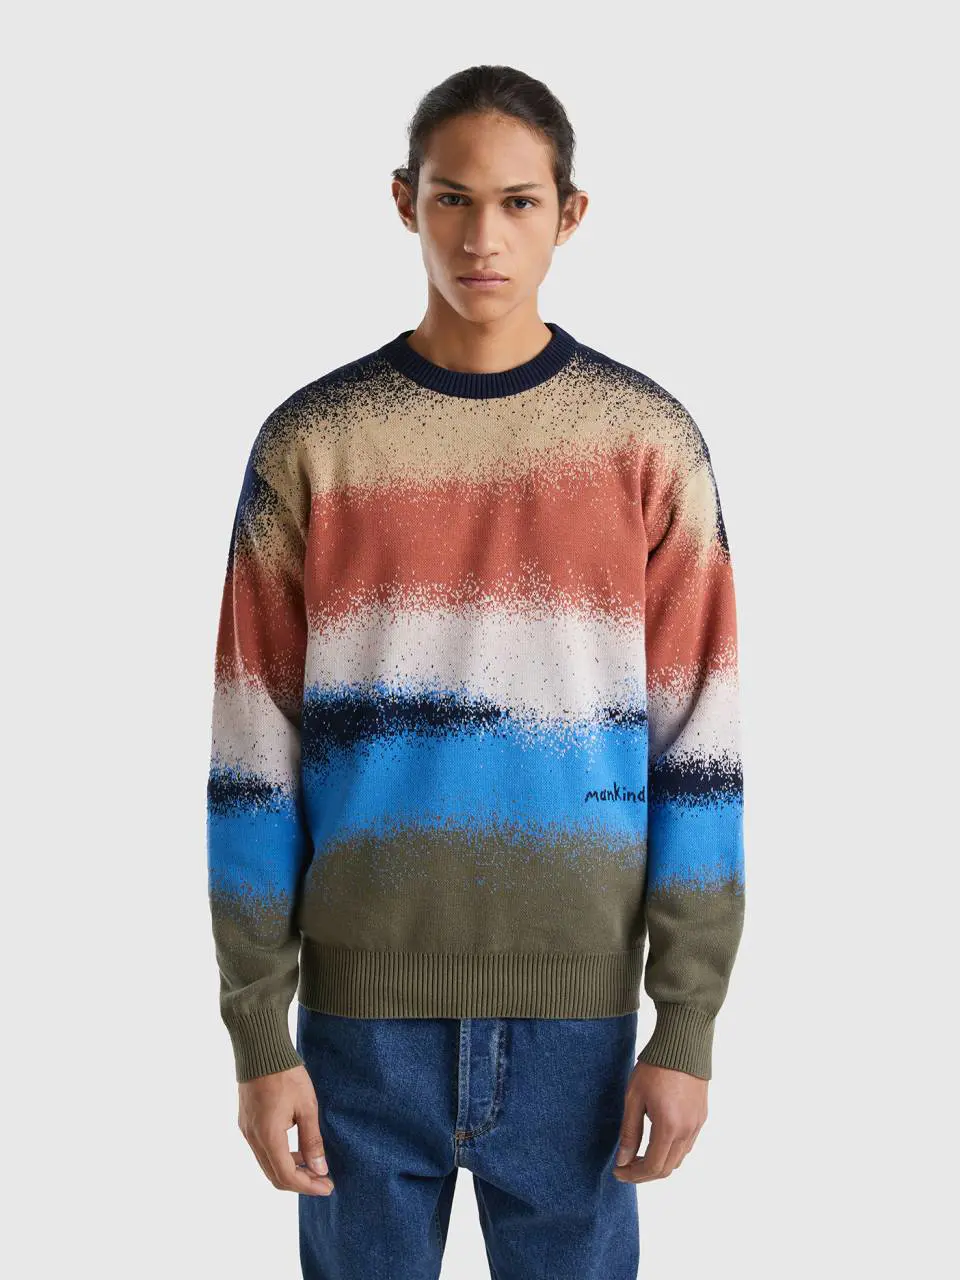 Benetton sweater with spray paint effect print. 1